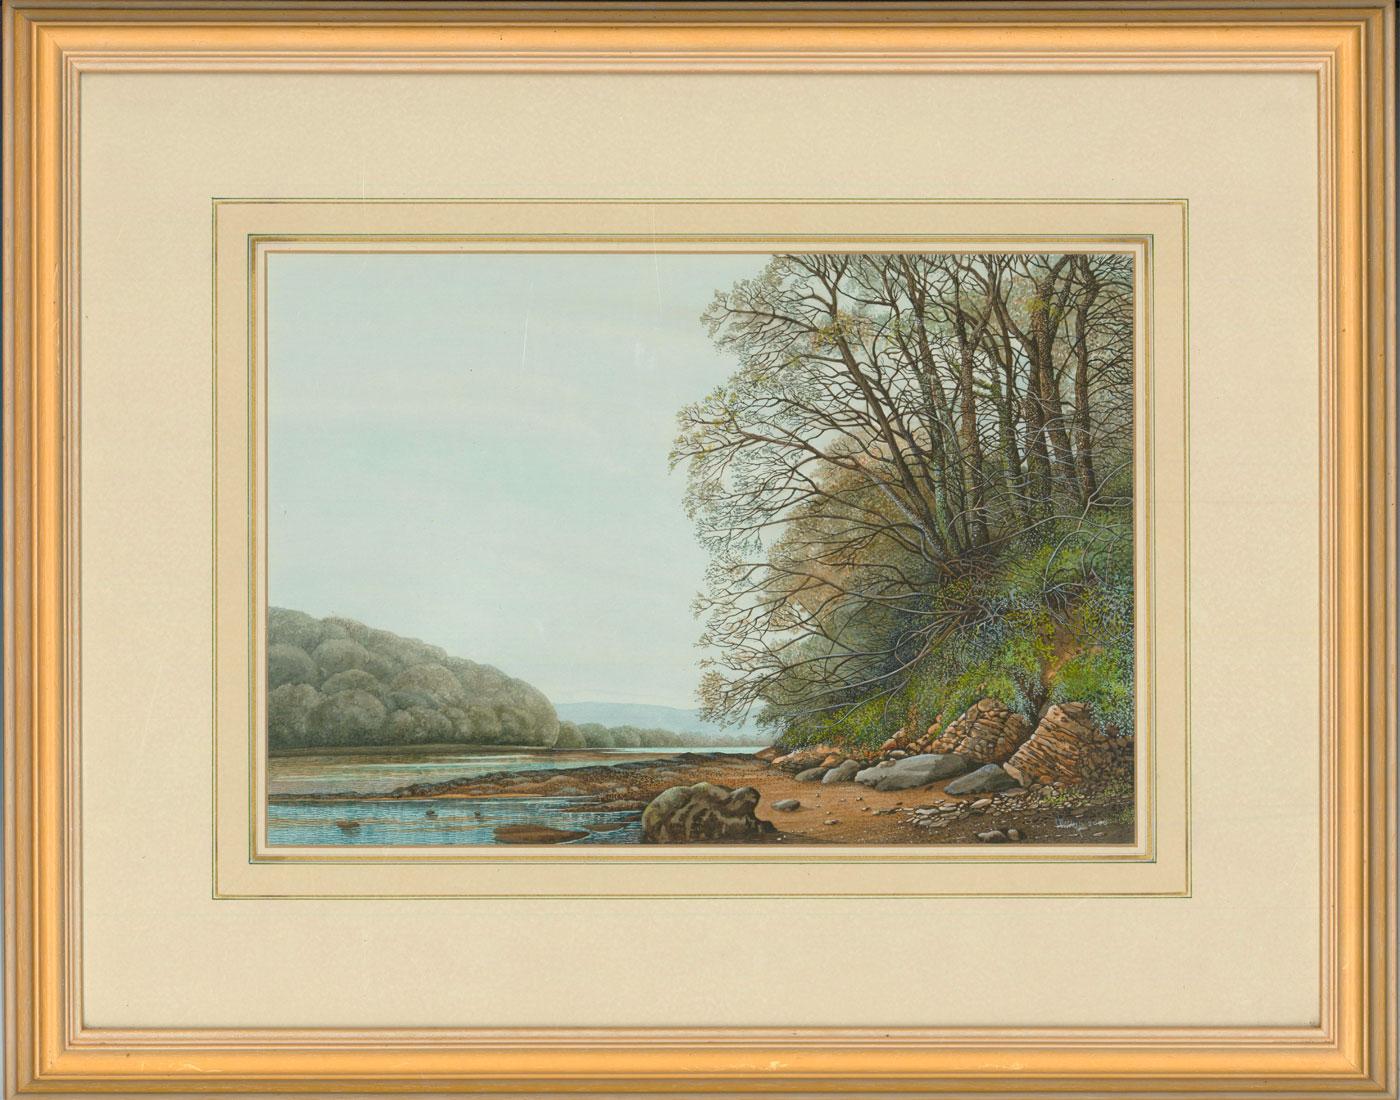 An impressive pair of watercolours by listed British artist John Whitney. The artwork showing a rive scene measures (45.5 x 56.5cm), window measures (24 x 35cm) and has an exhibition label on the reverse inscribed 'Manyley, Fowey Estuary, Cornwall.